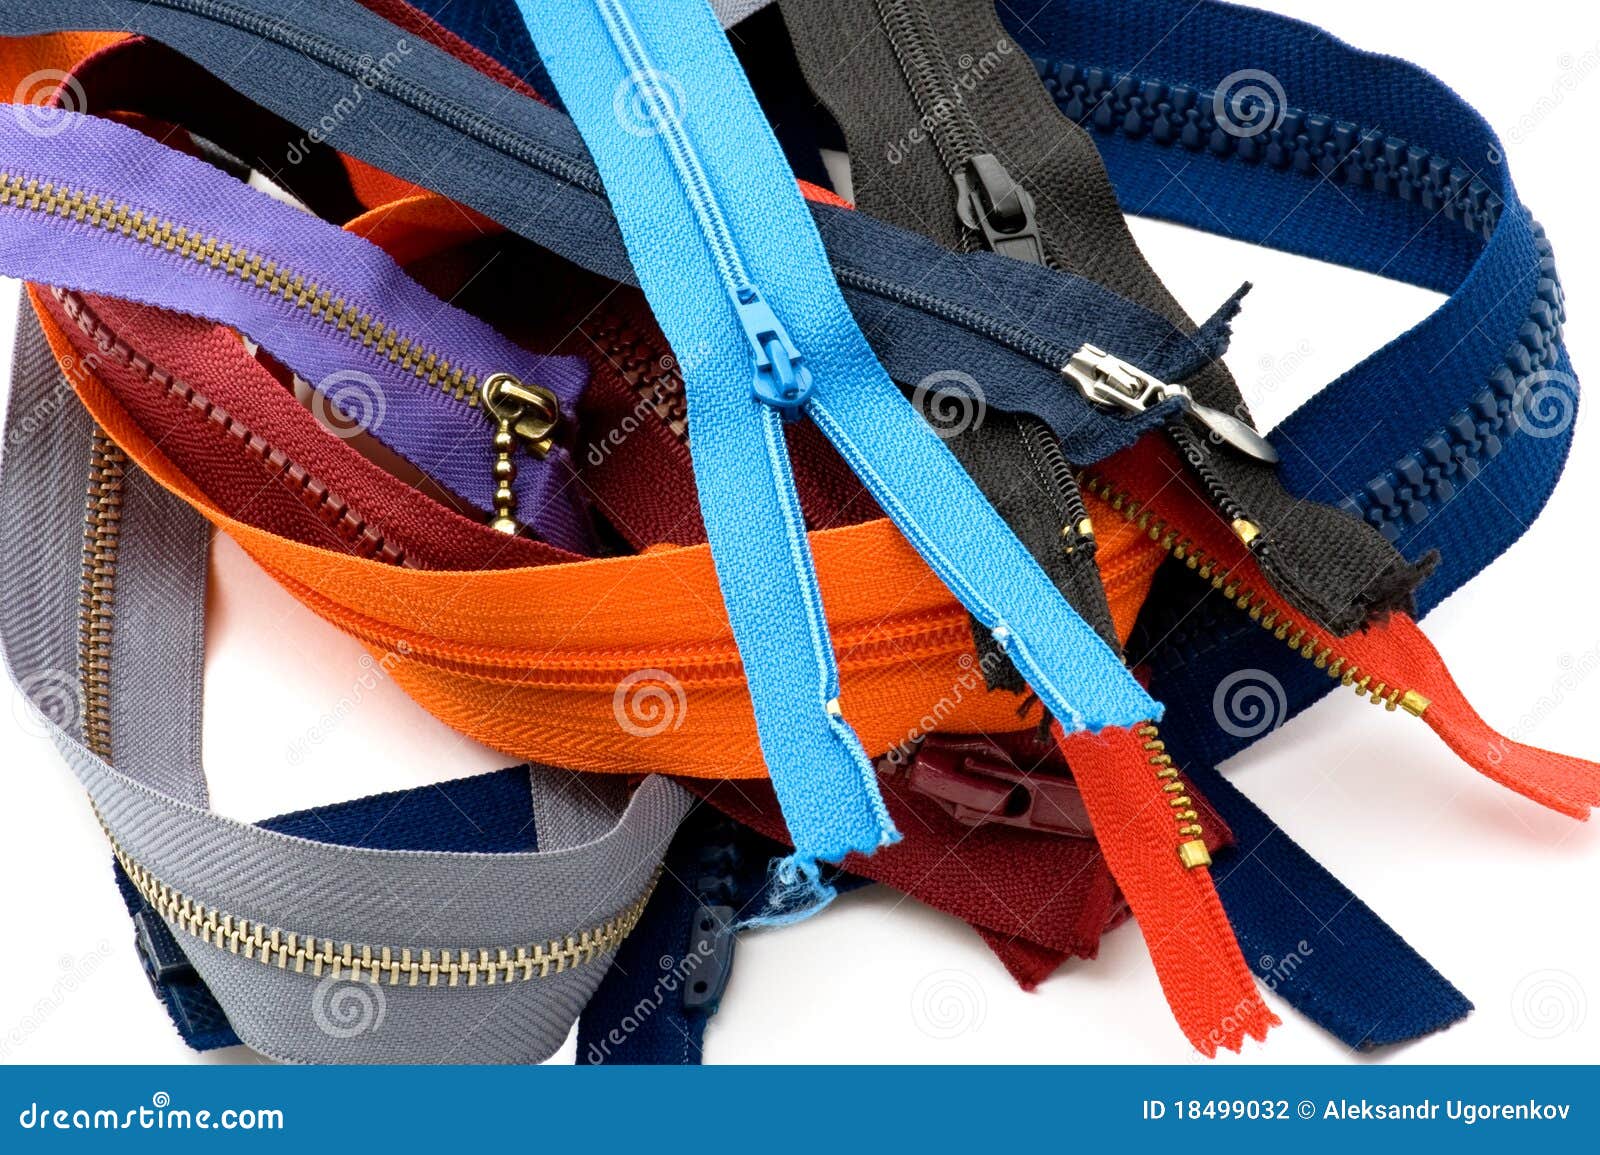 Zip close up on white stock photo. Image of open, unzip - 18499032